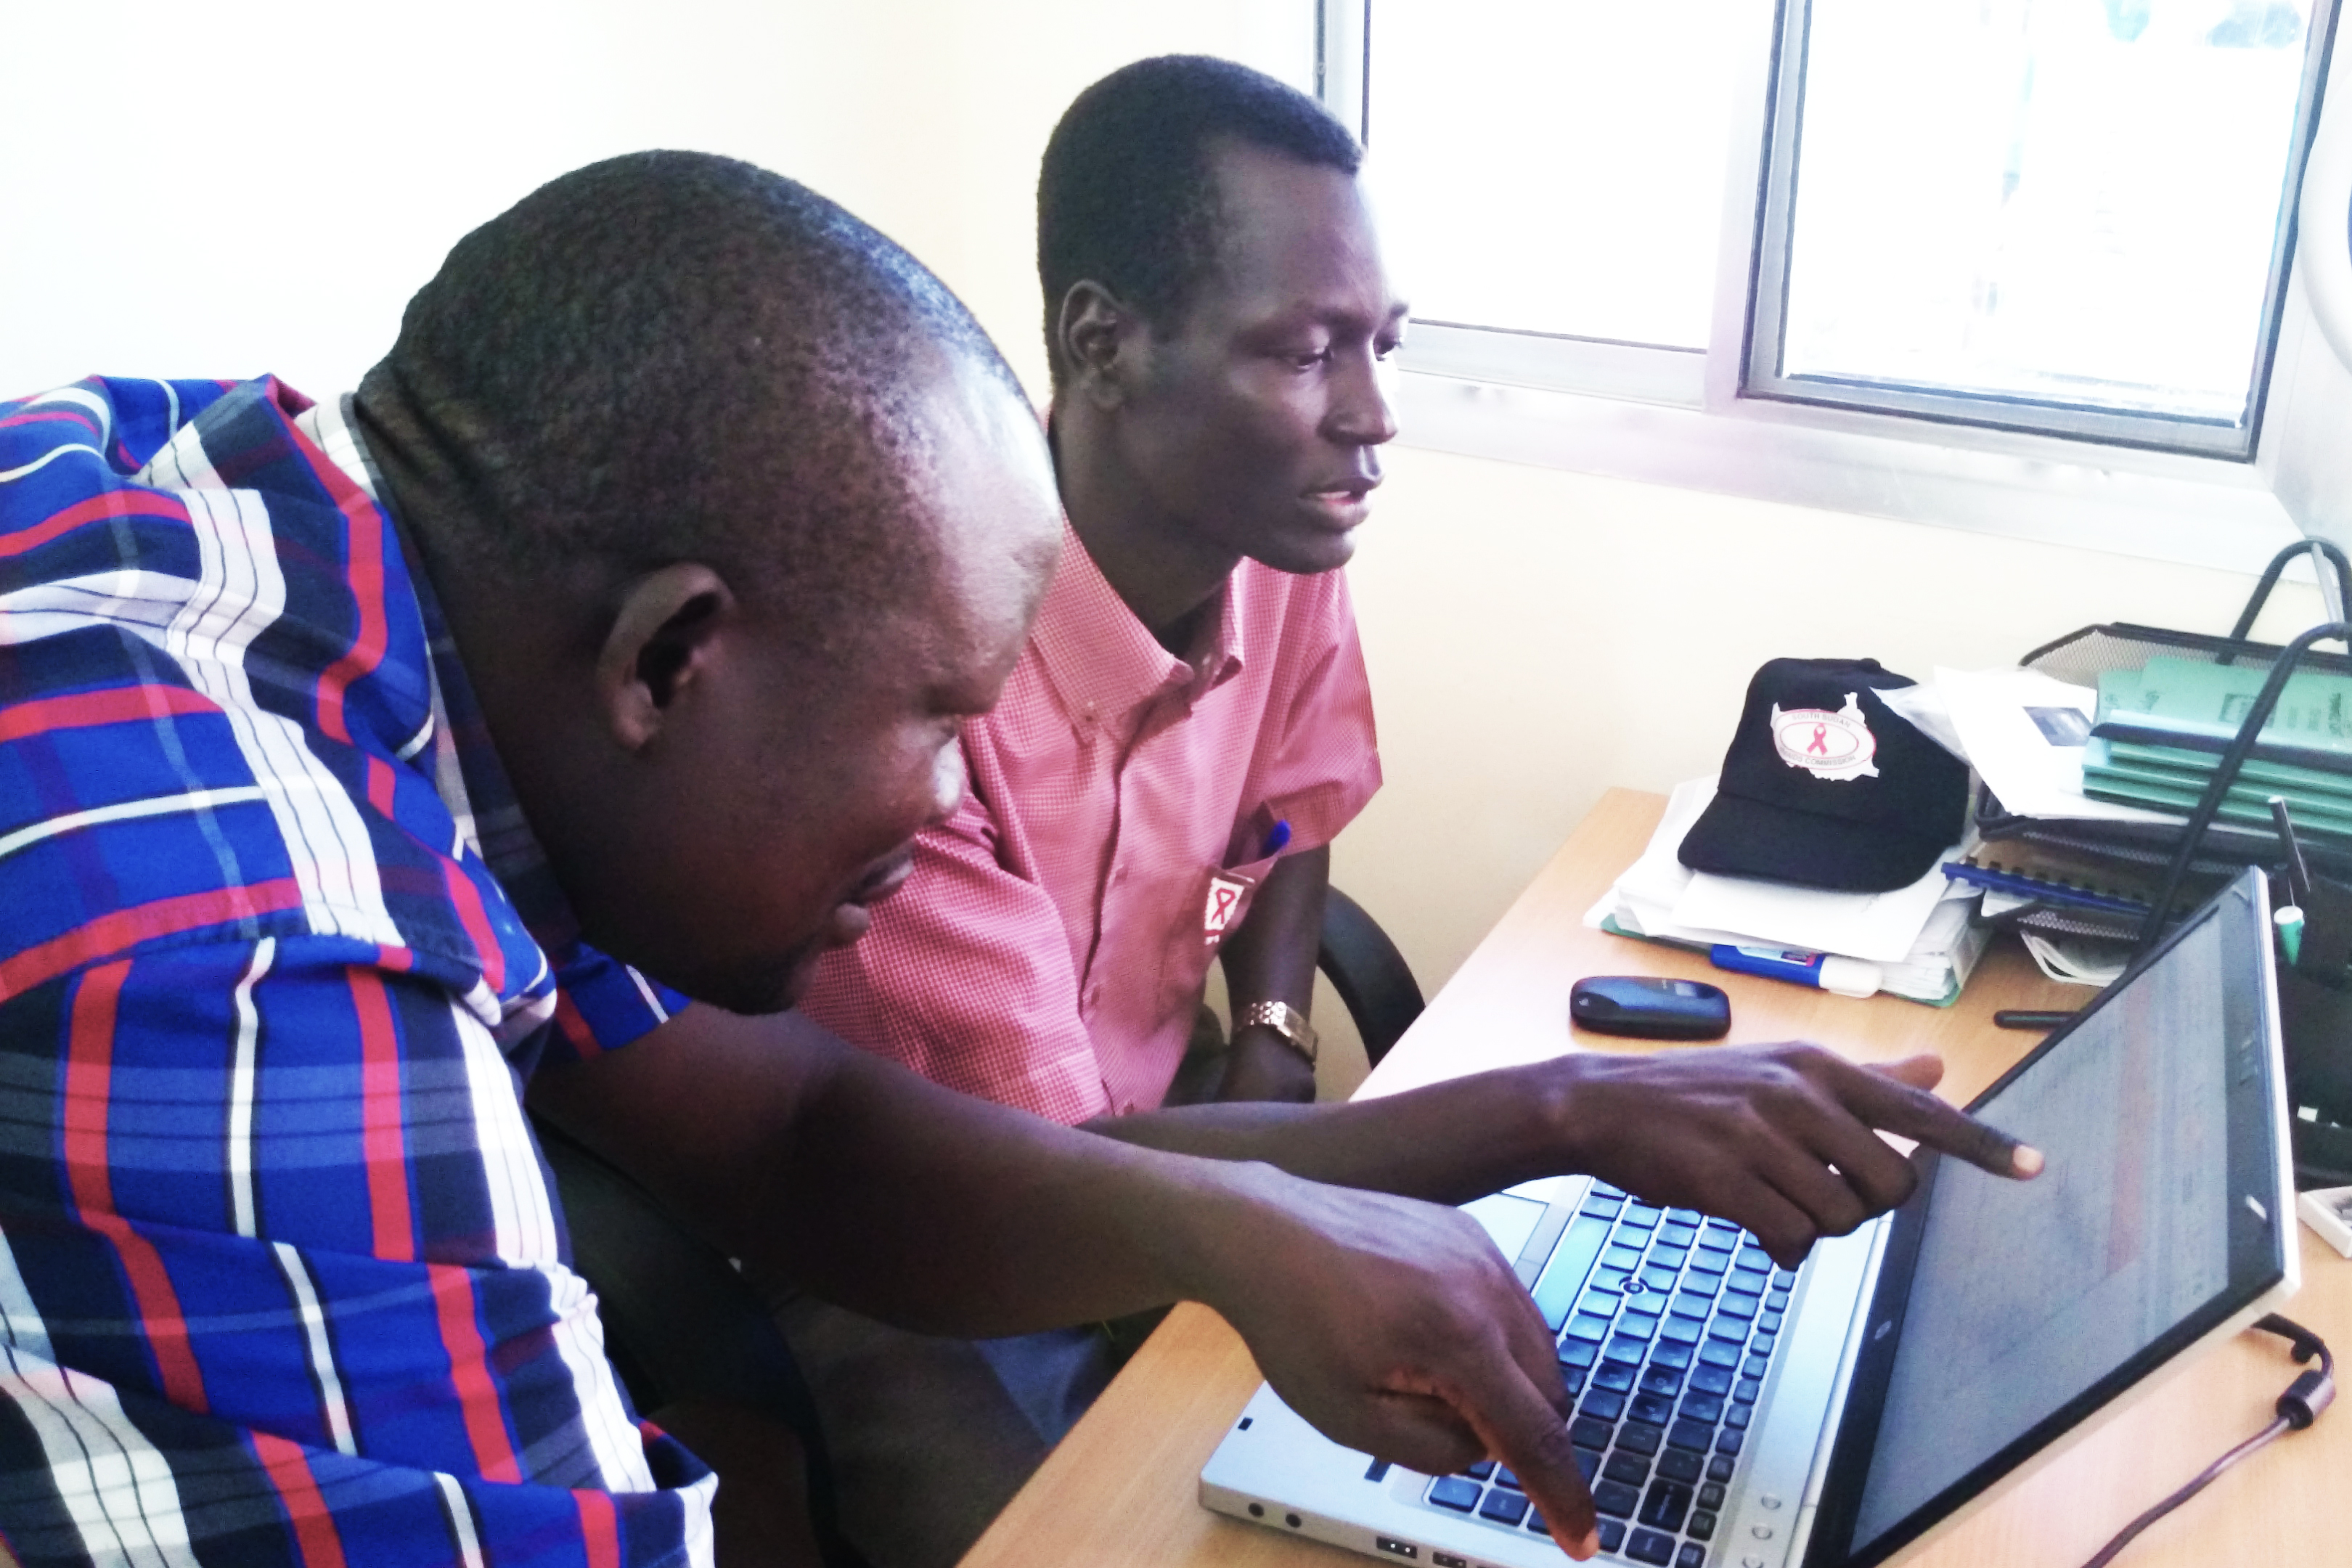 Acaga mentors and coaches Ajak and gives him hands-on training on the key aspects of data collection, analysis, dissemination, storage, and coordination among partners.